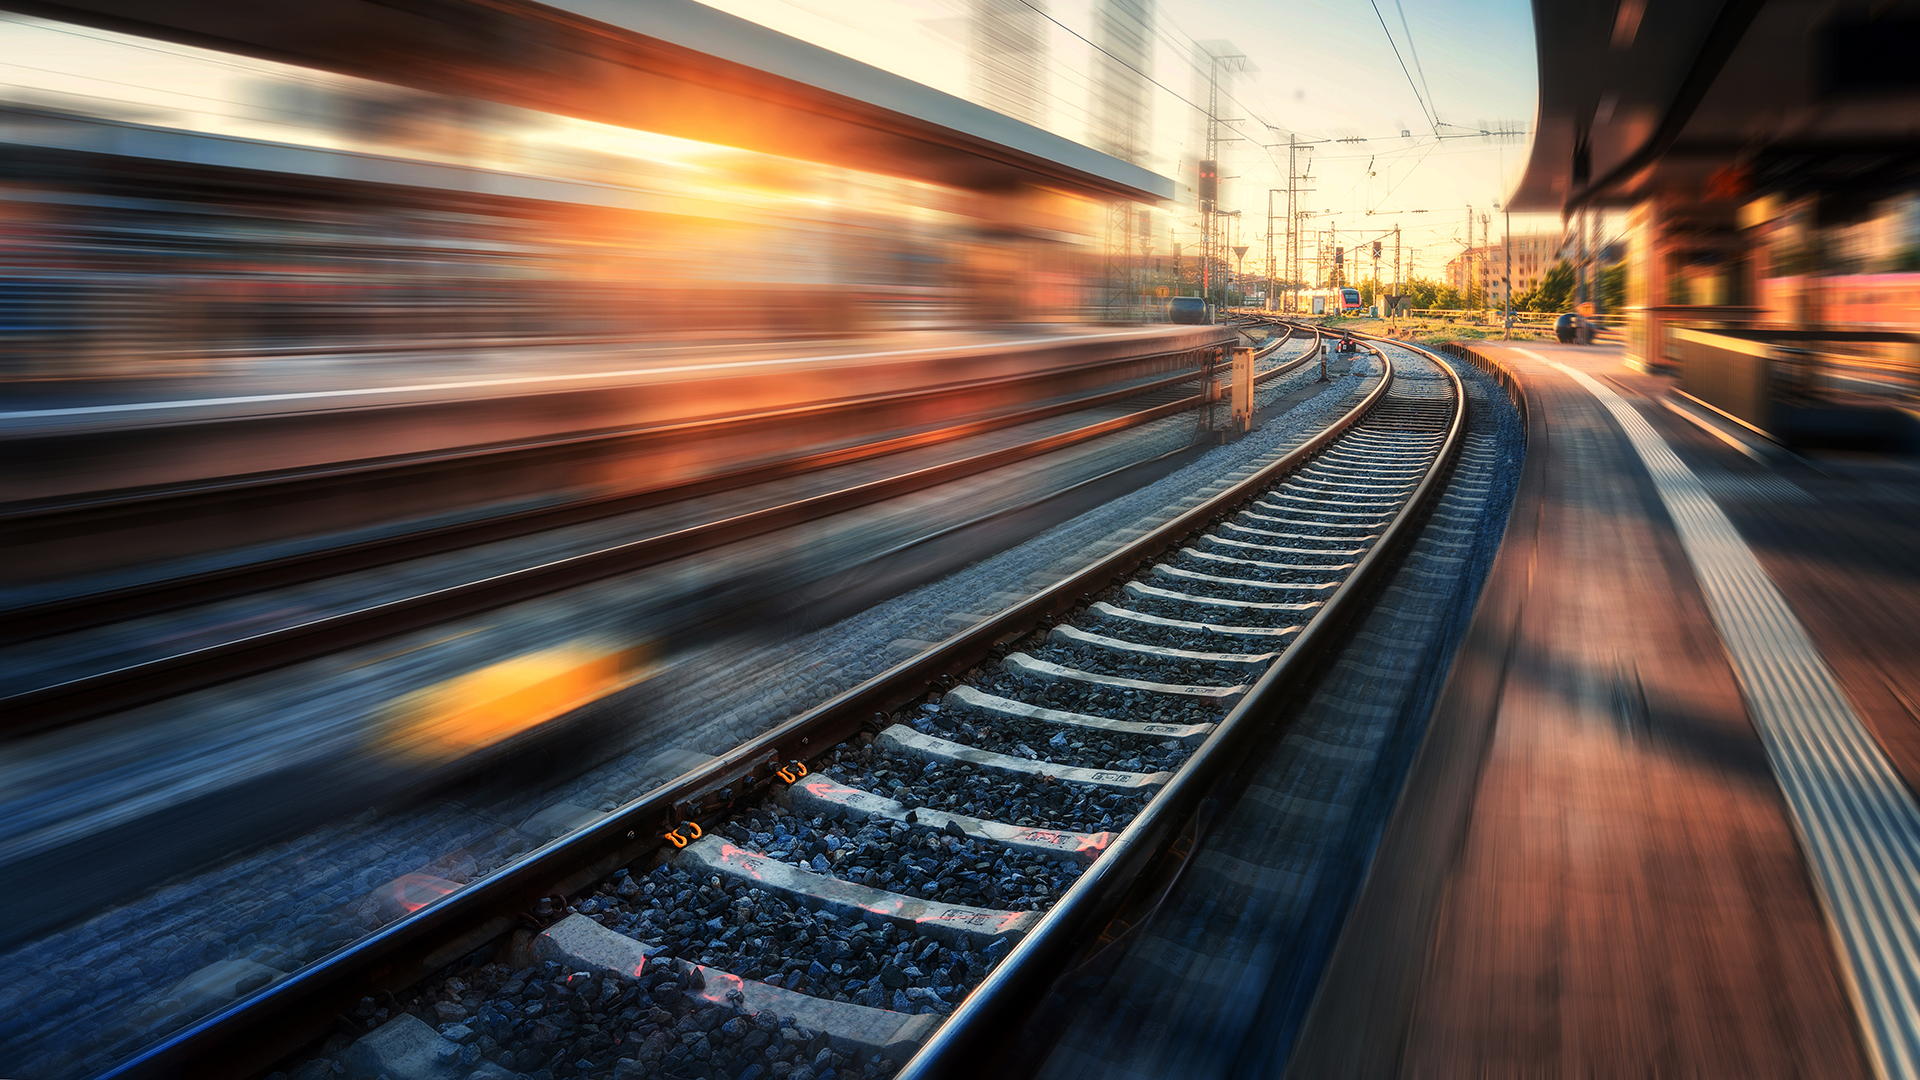 Railway station with motion blur effect at sunset. Industrial landscape with railroad, blurred railway platform, sky with orange sunlight in the evening. Railway junction in Europe. Transportation